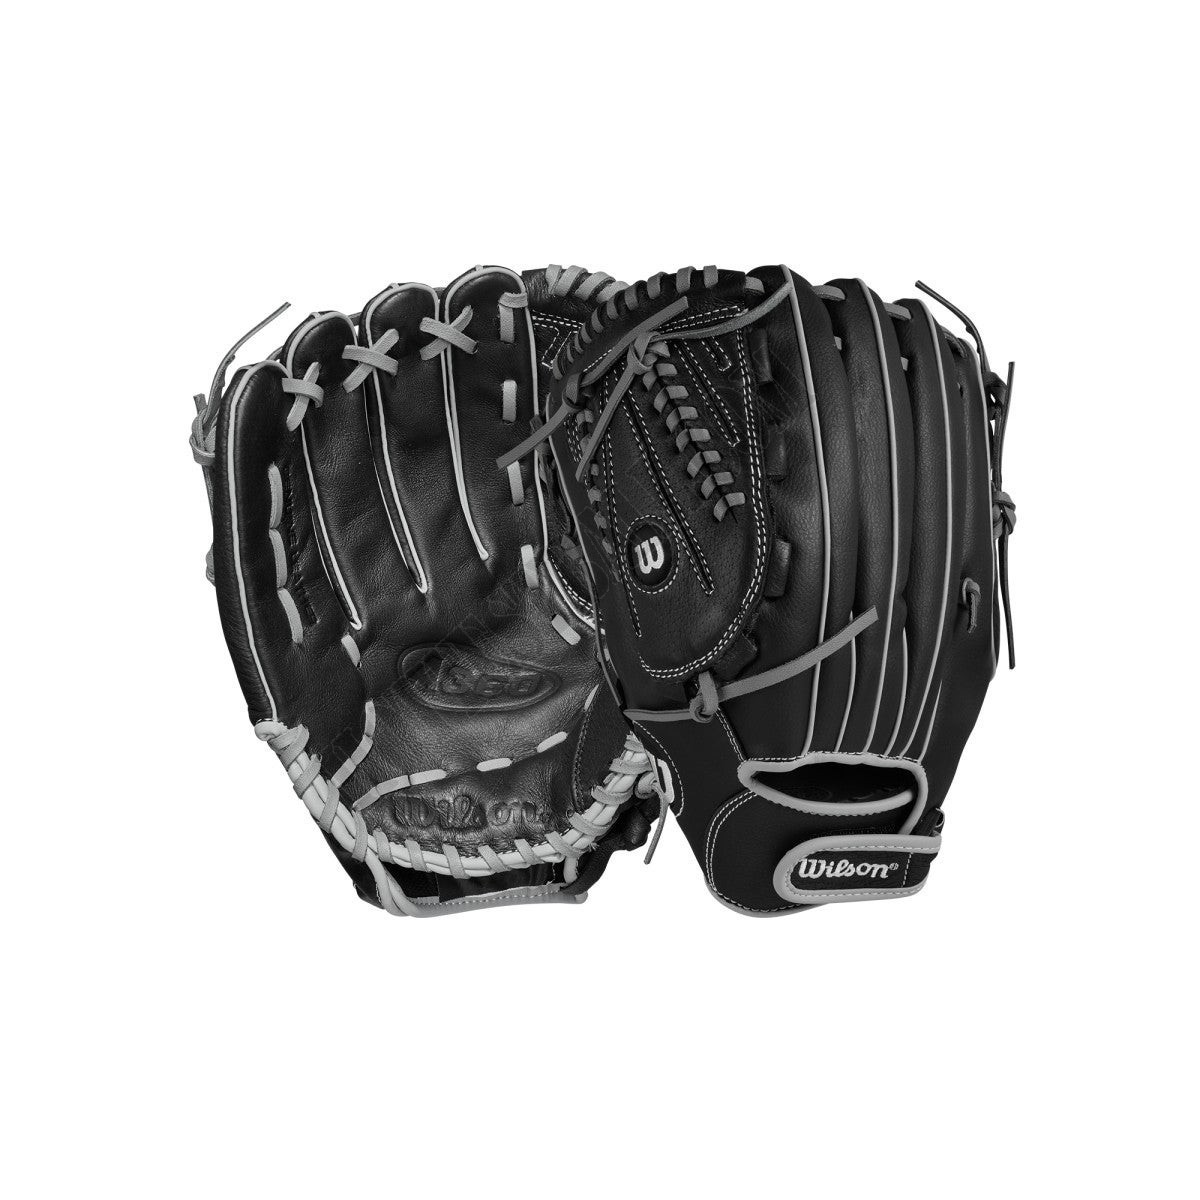 A360 13" Slowpitch Glove - Left Hand Throw ● Wilson Promotions - -0